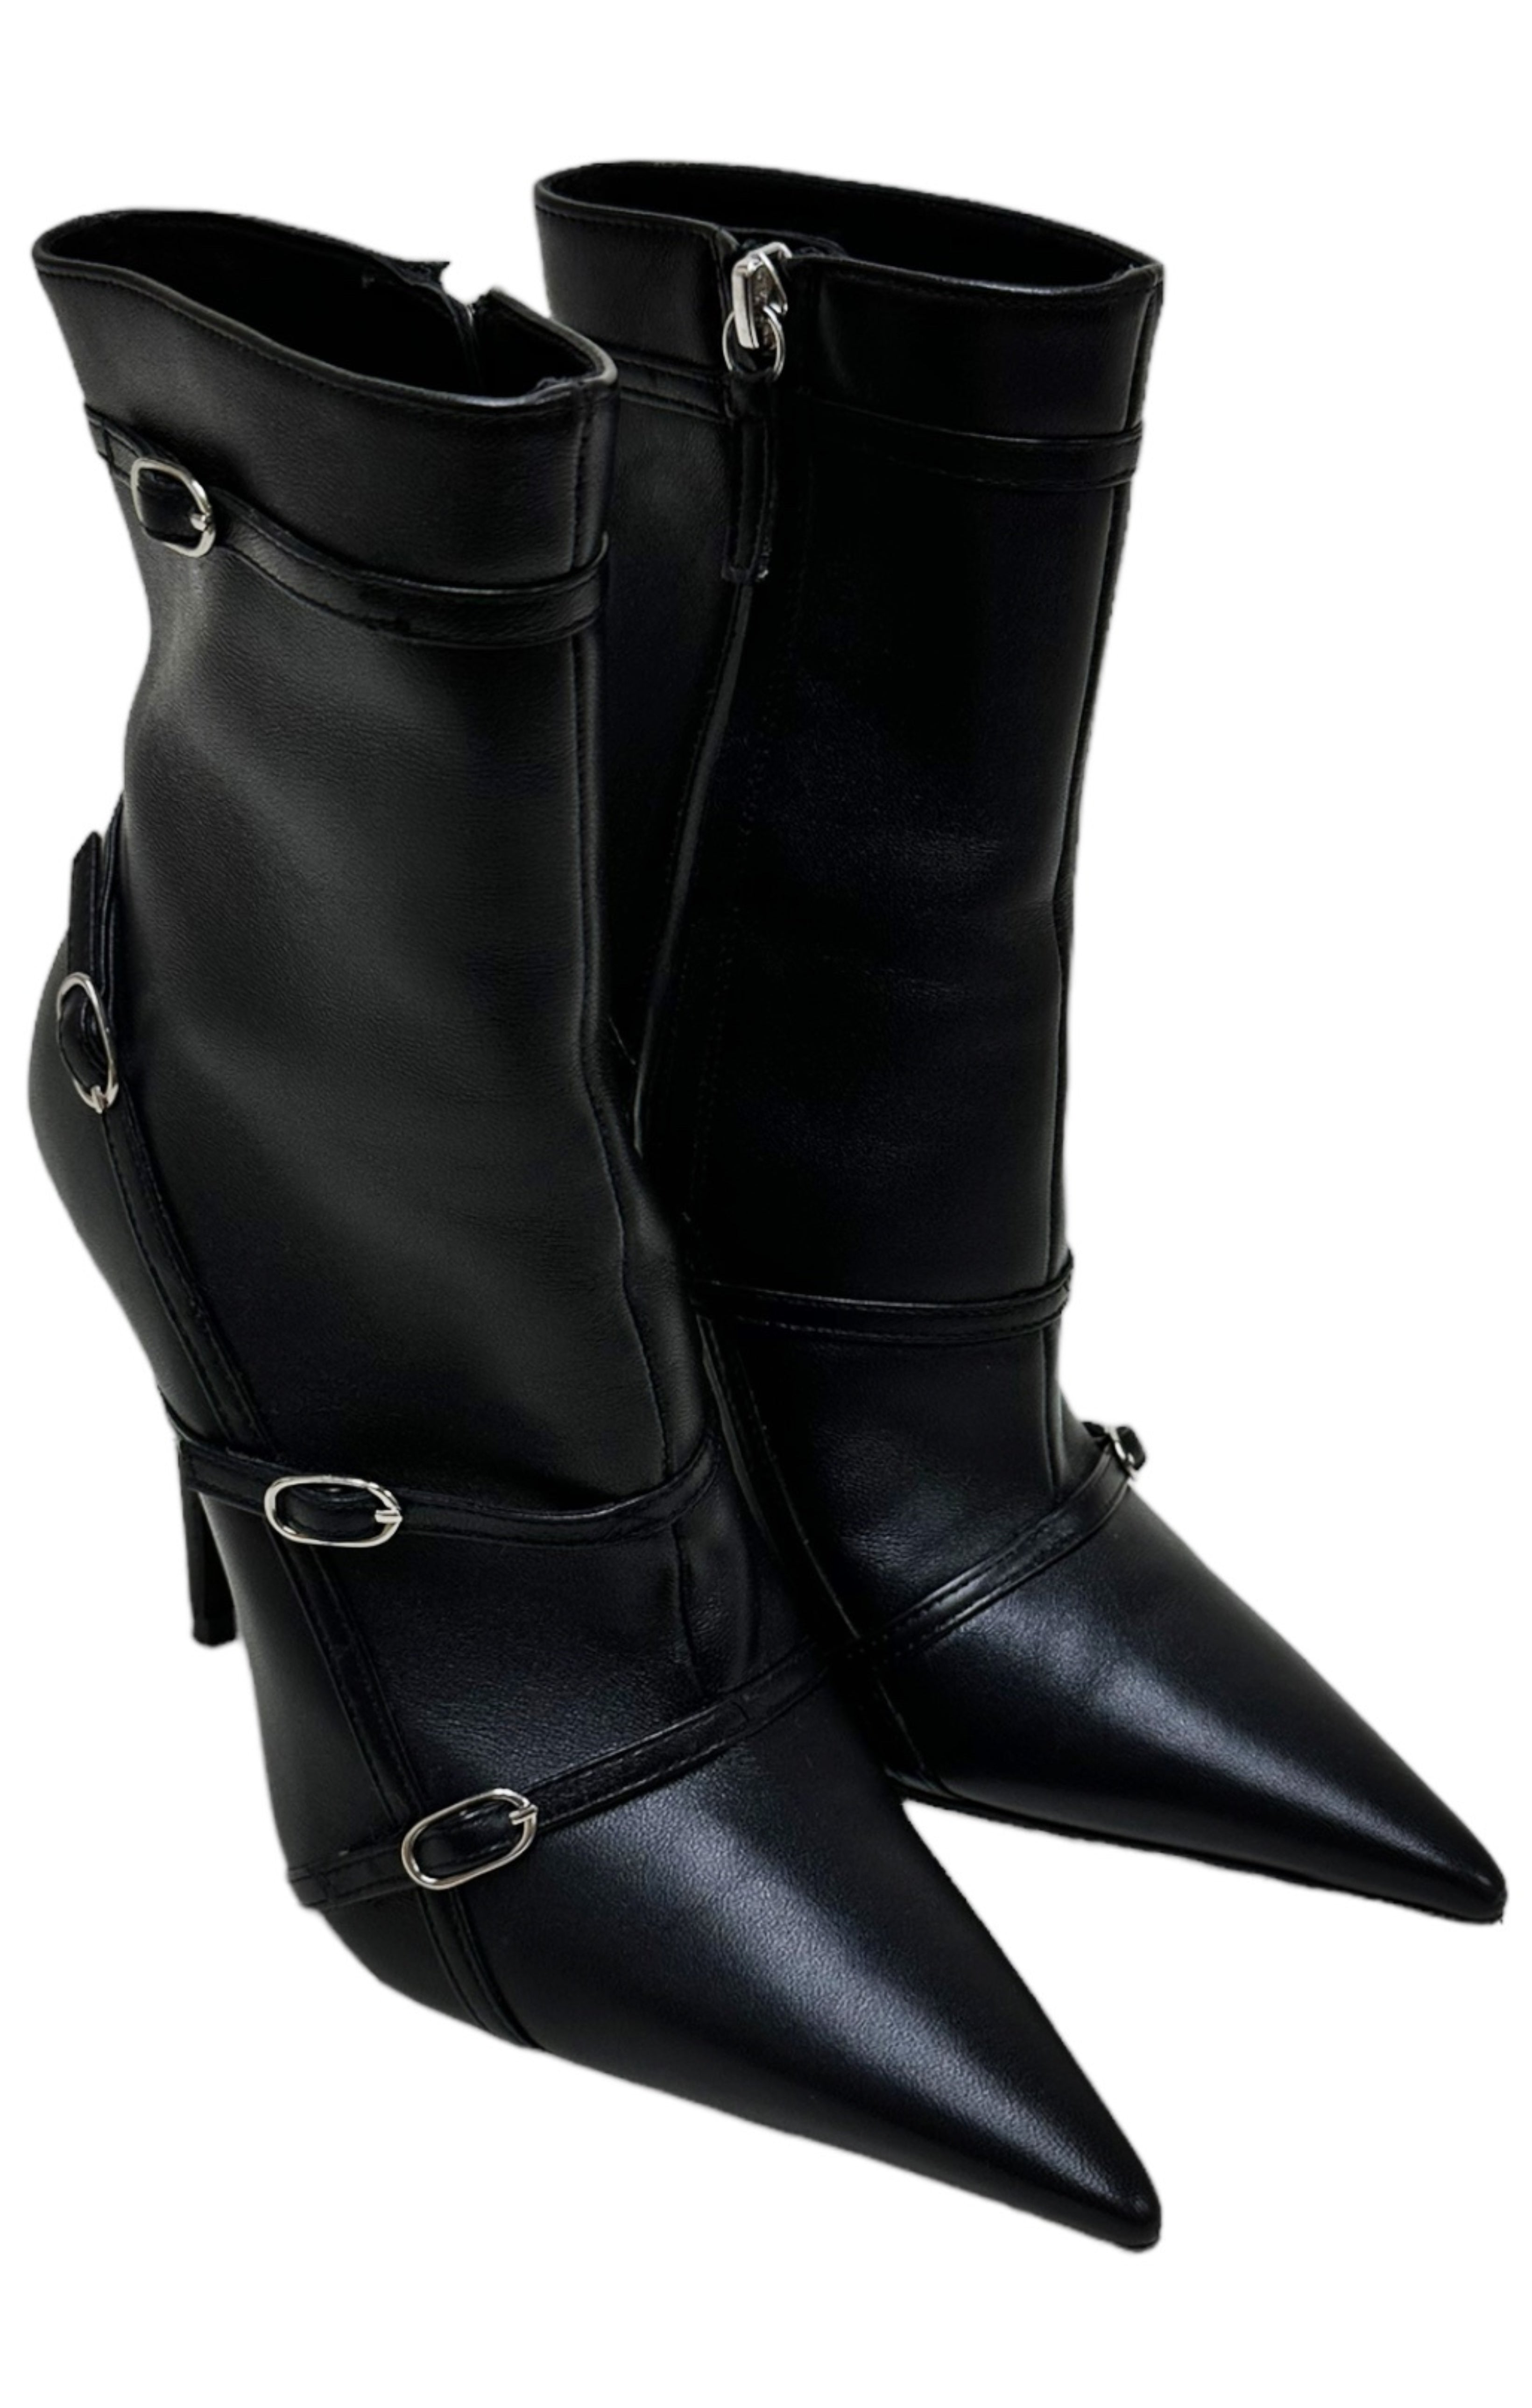 ABRA (RARE) Boots Size: EUR 36 / Fit like US 5.5-6